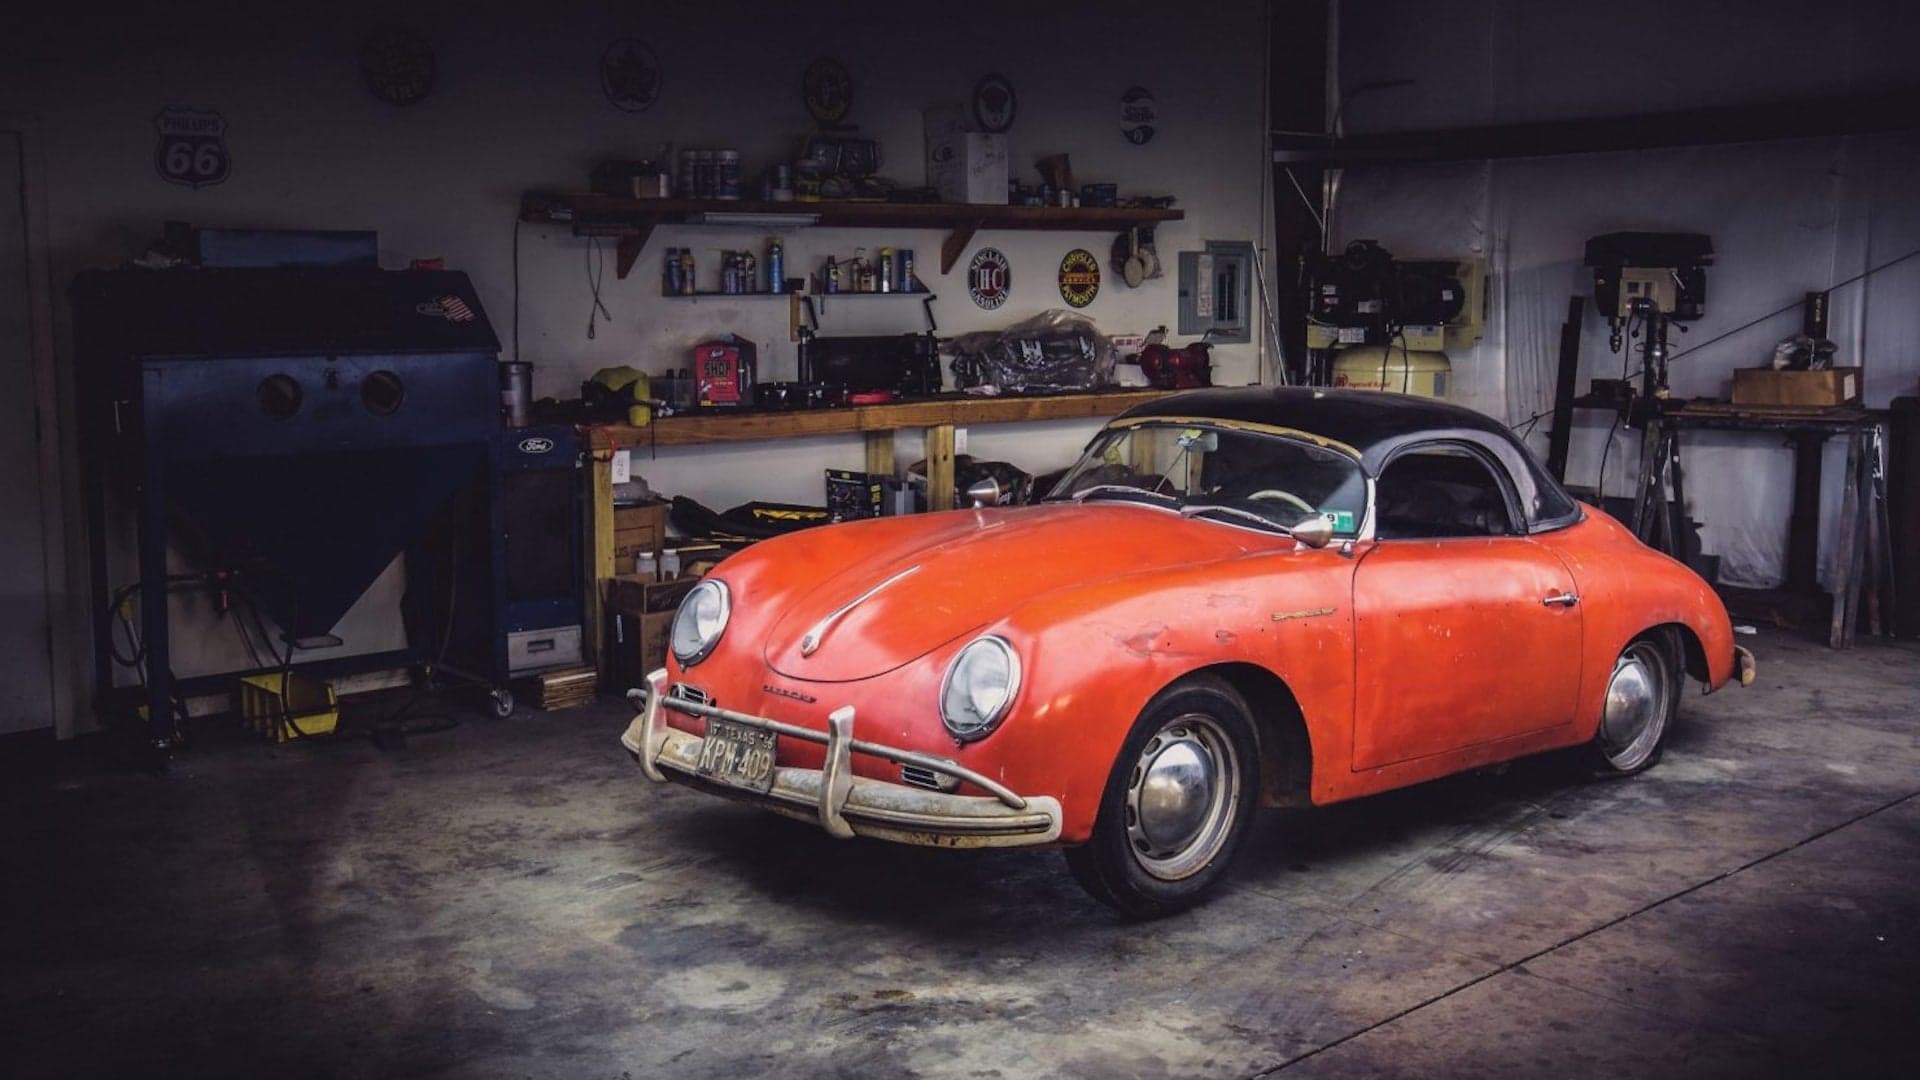 This Custom Air-Cooled Porsche Barn Find Spent 40 Years Sitting